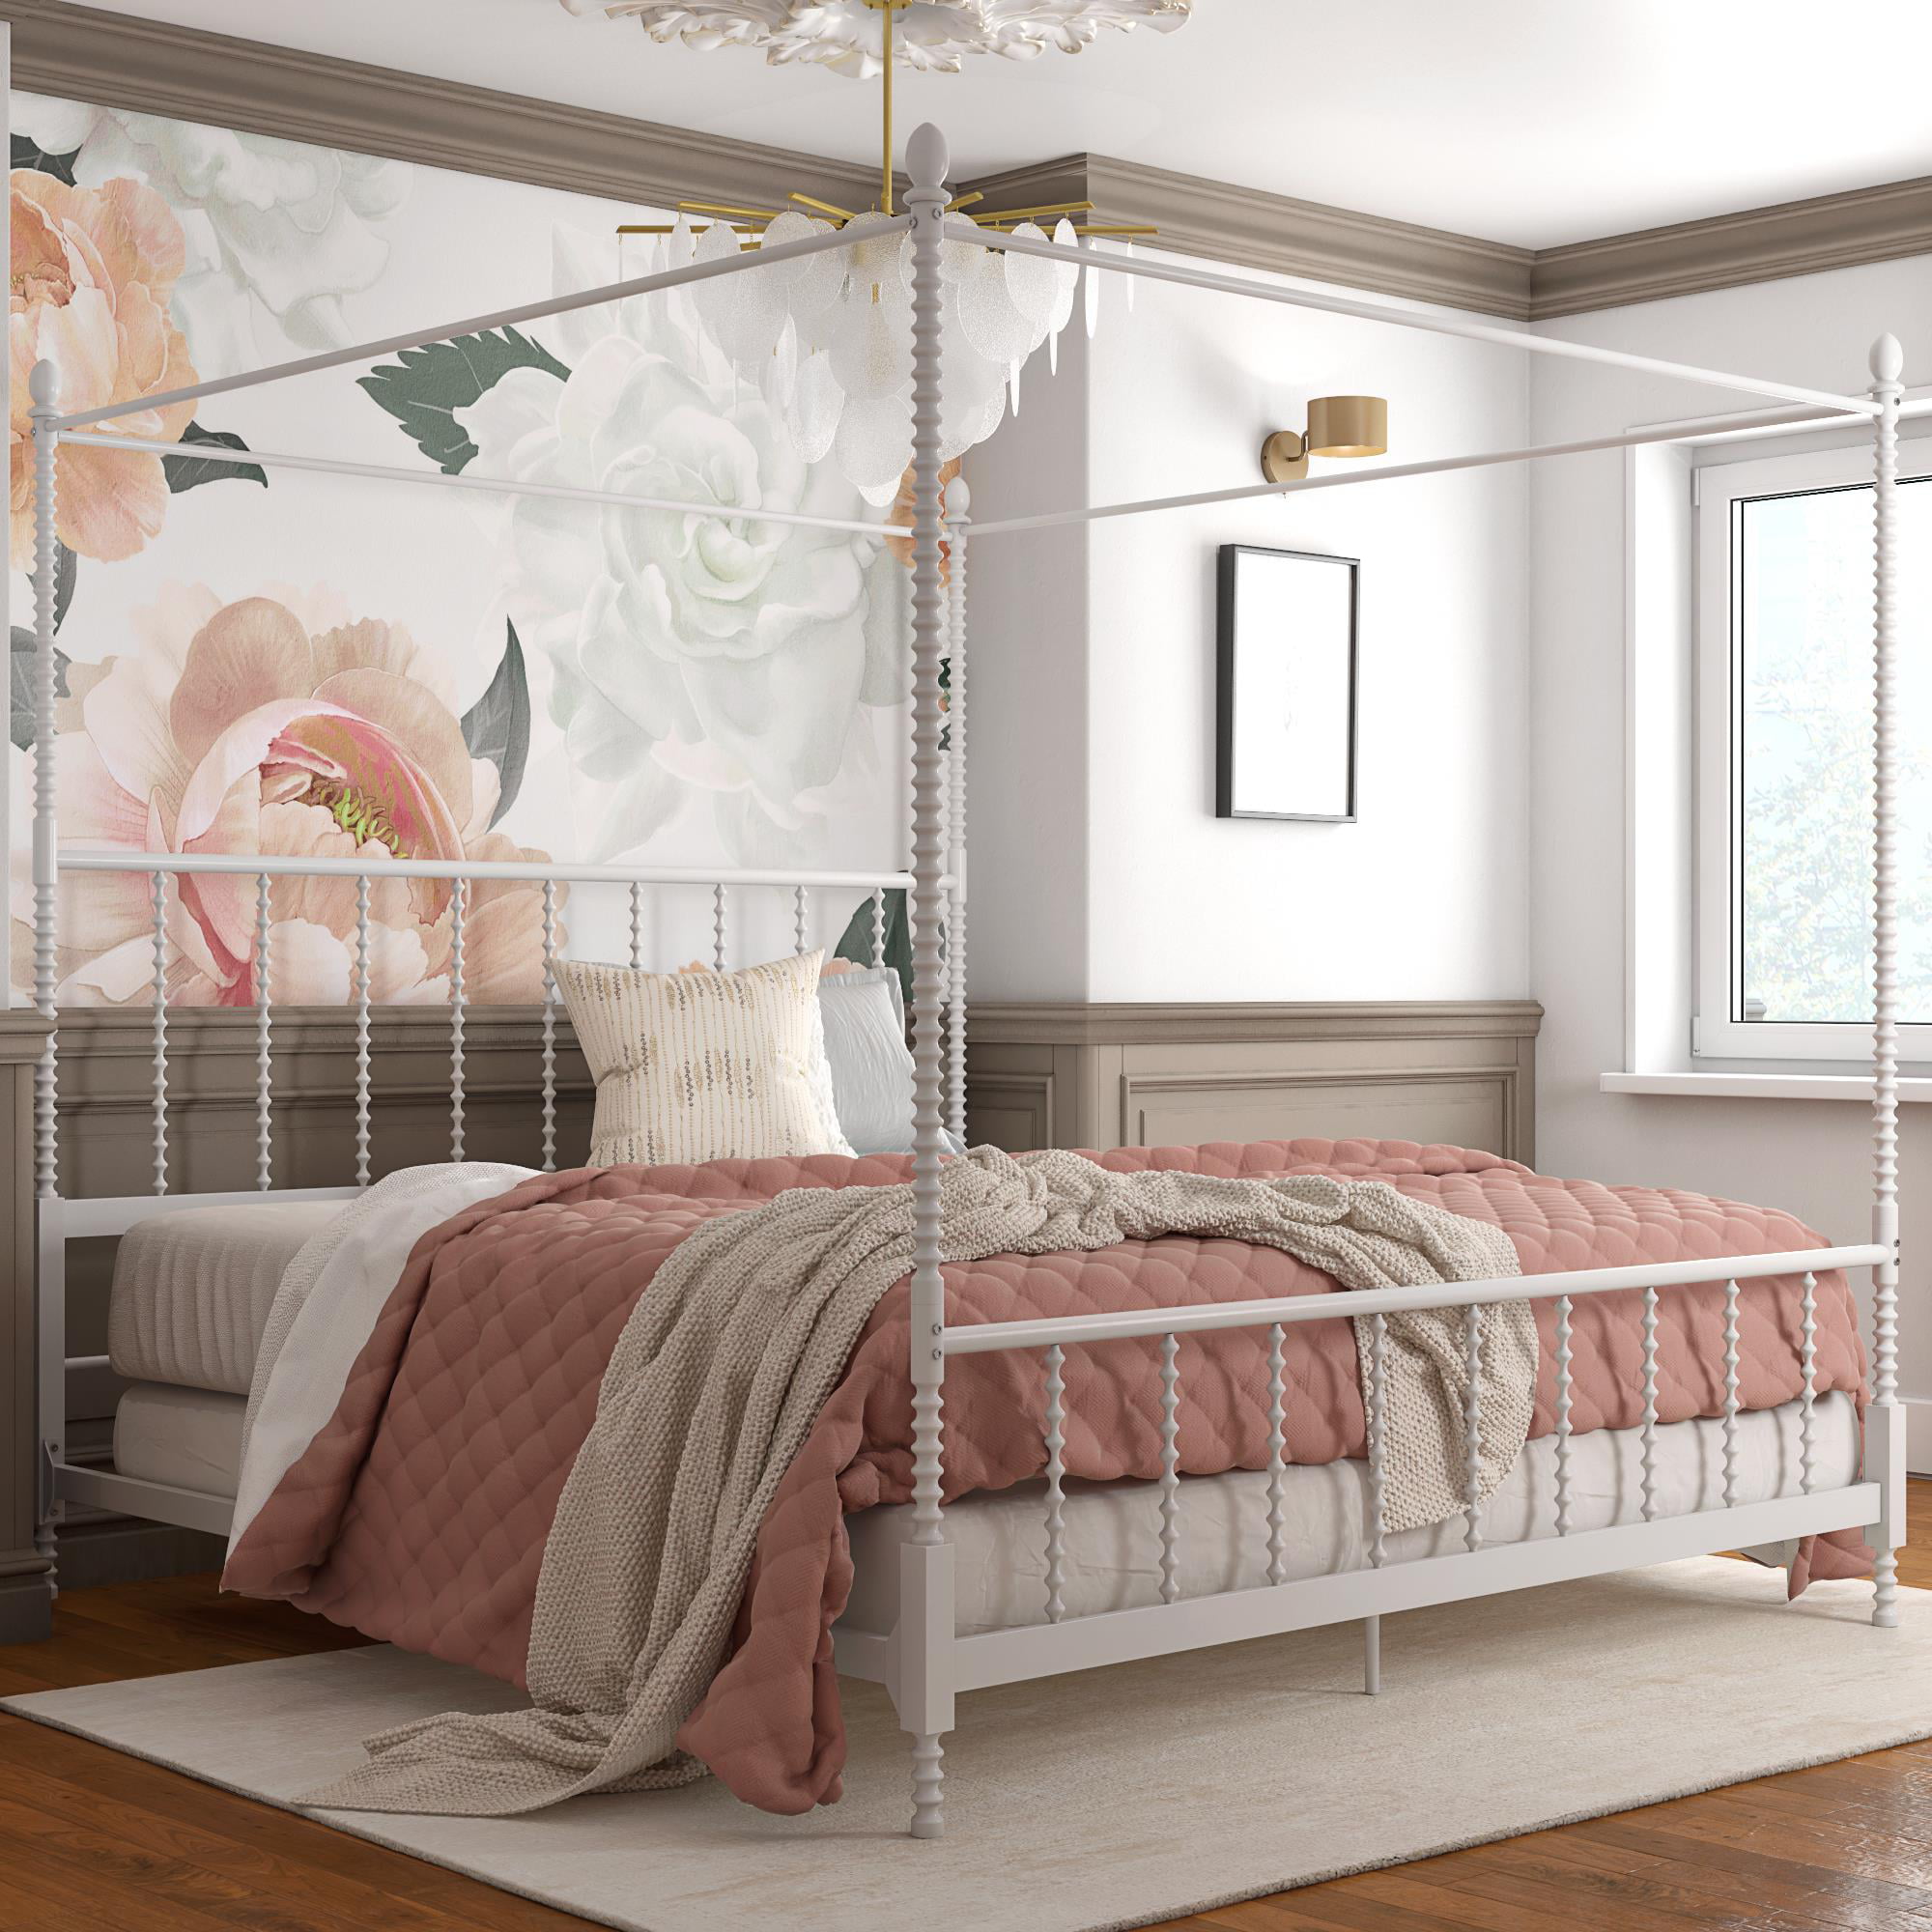 Dhp Anika Metal Canopy Bed King Size Frame Bedroom Furniture White